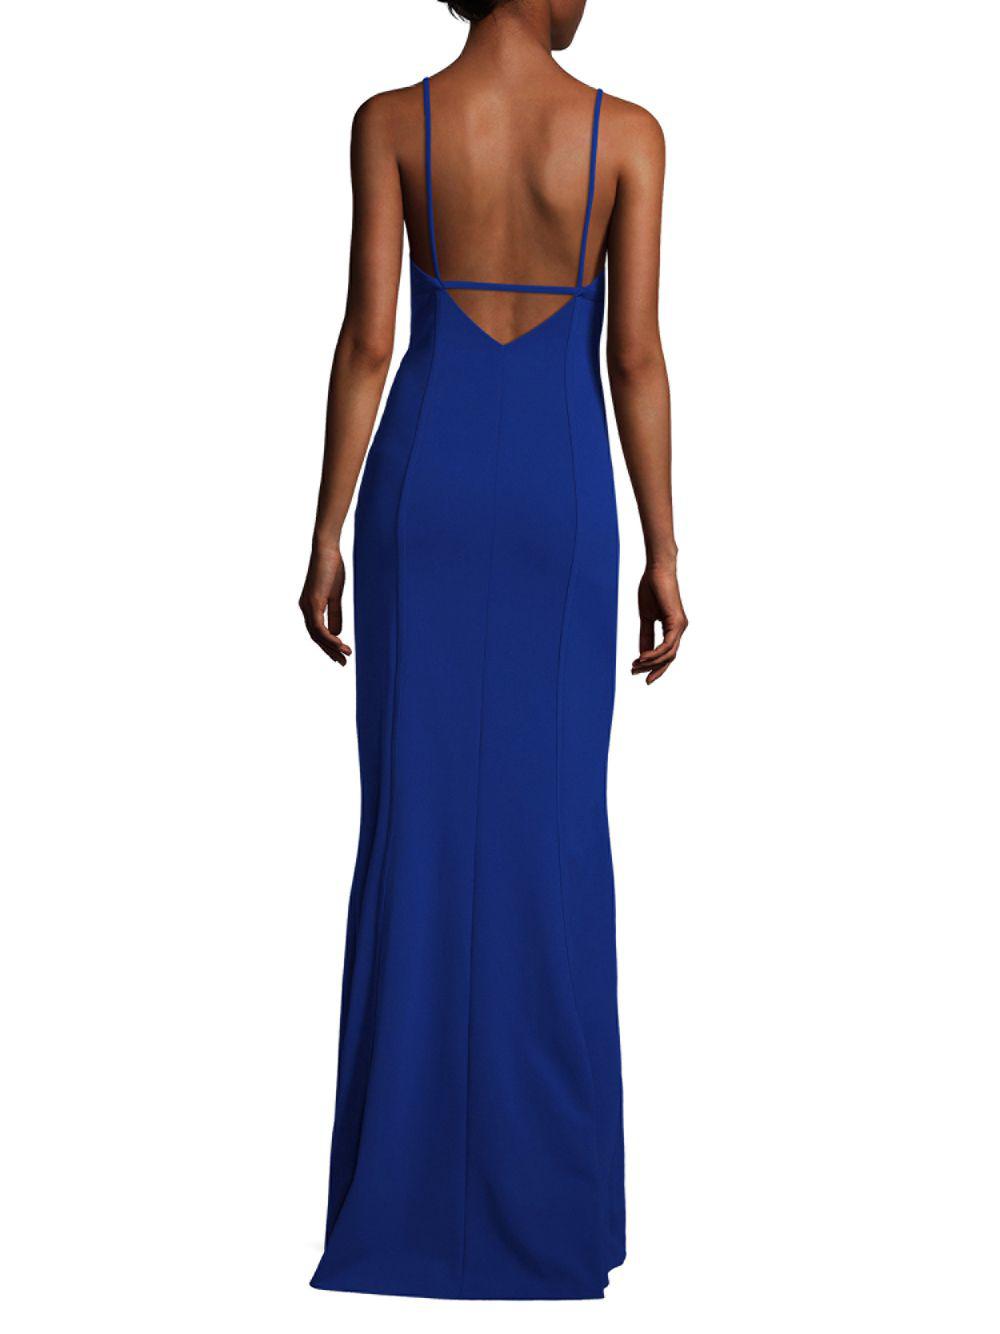 Aidan Mattox Synthetic Keyhole Halter Gown in Cobalt (Blue) - Lyst